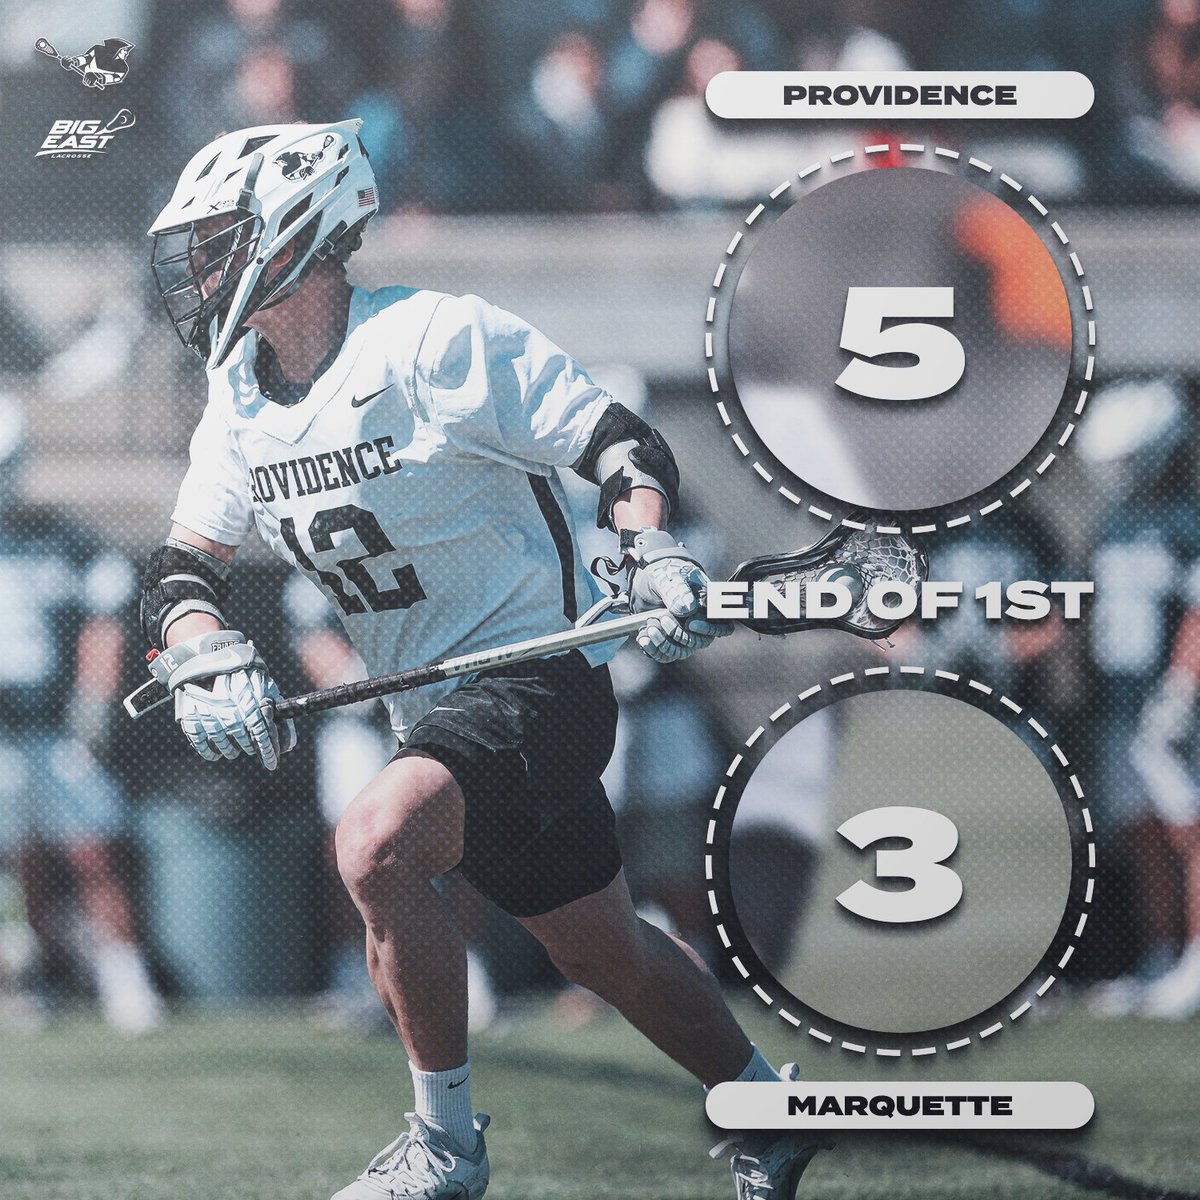 End of 1st: Providence 5, Marquette 3